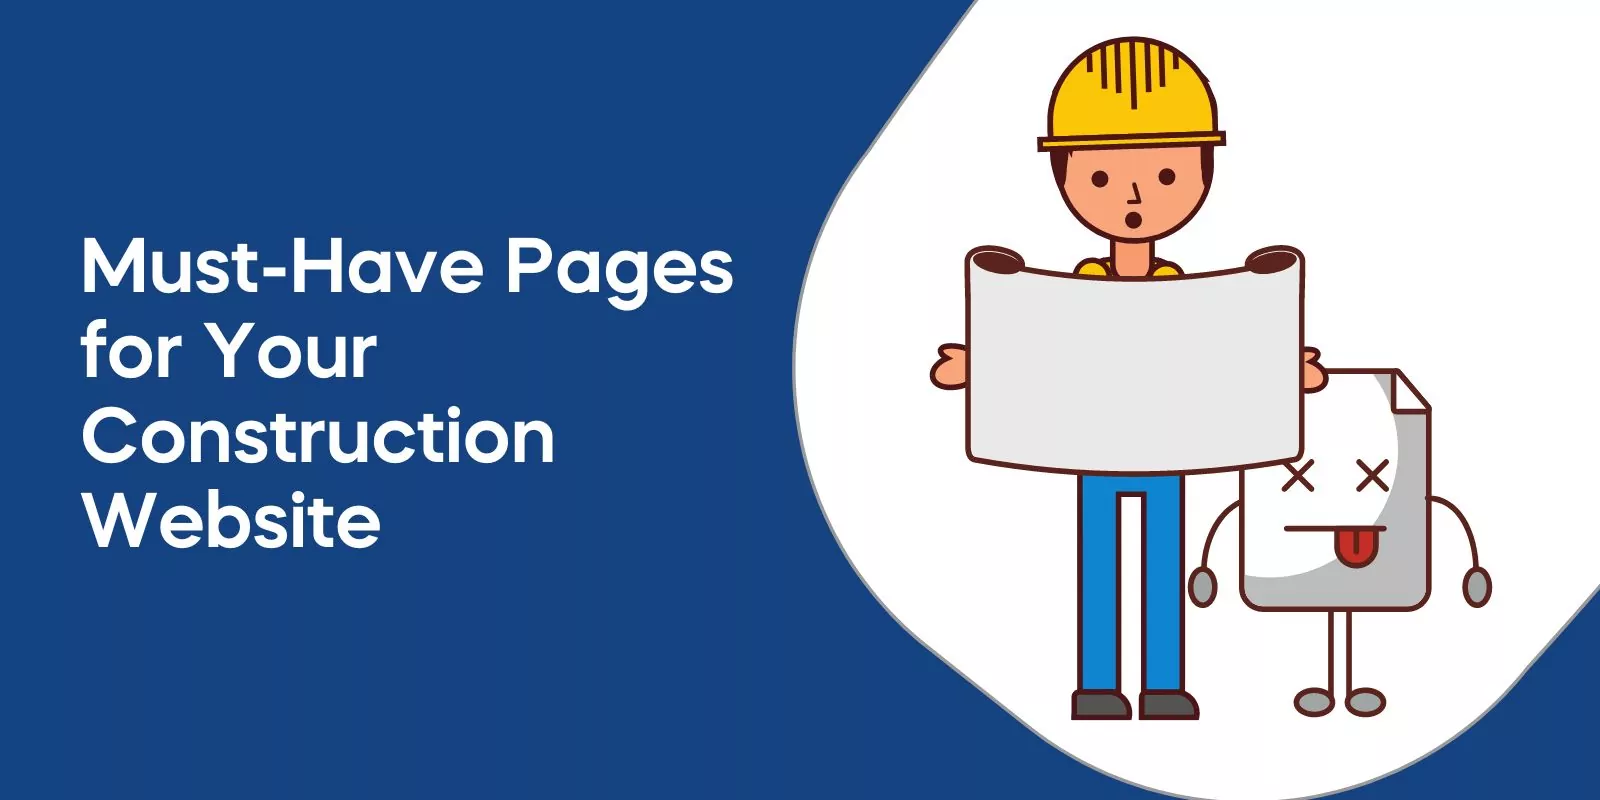 Must-Have Pages for Your Construction Website